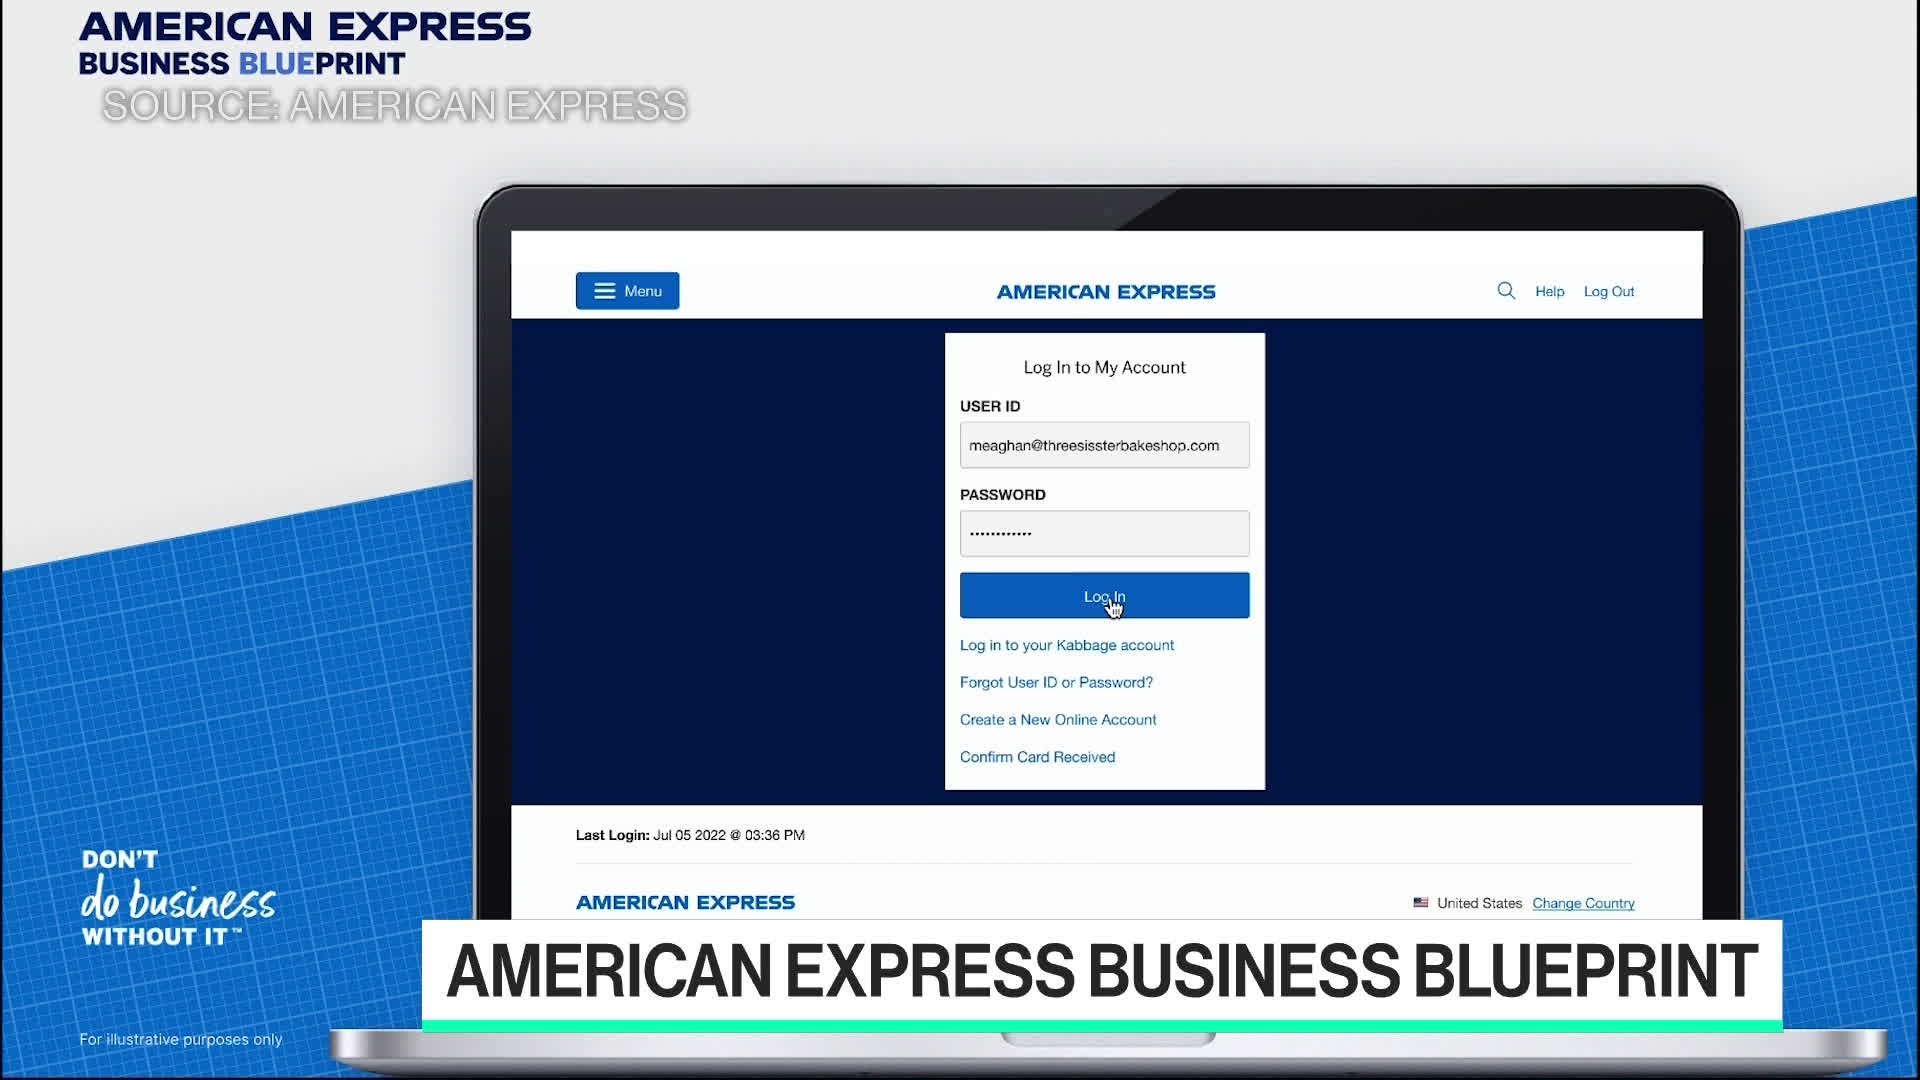 Watch American Express Expands Offerings to Small Businesses